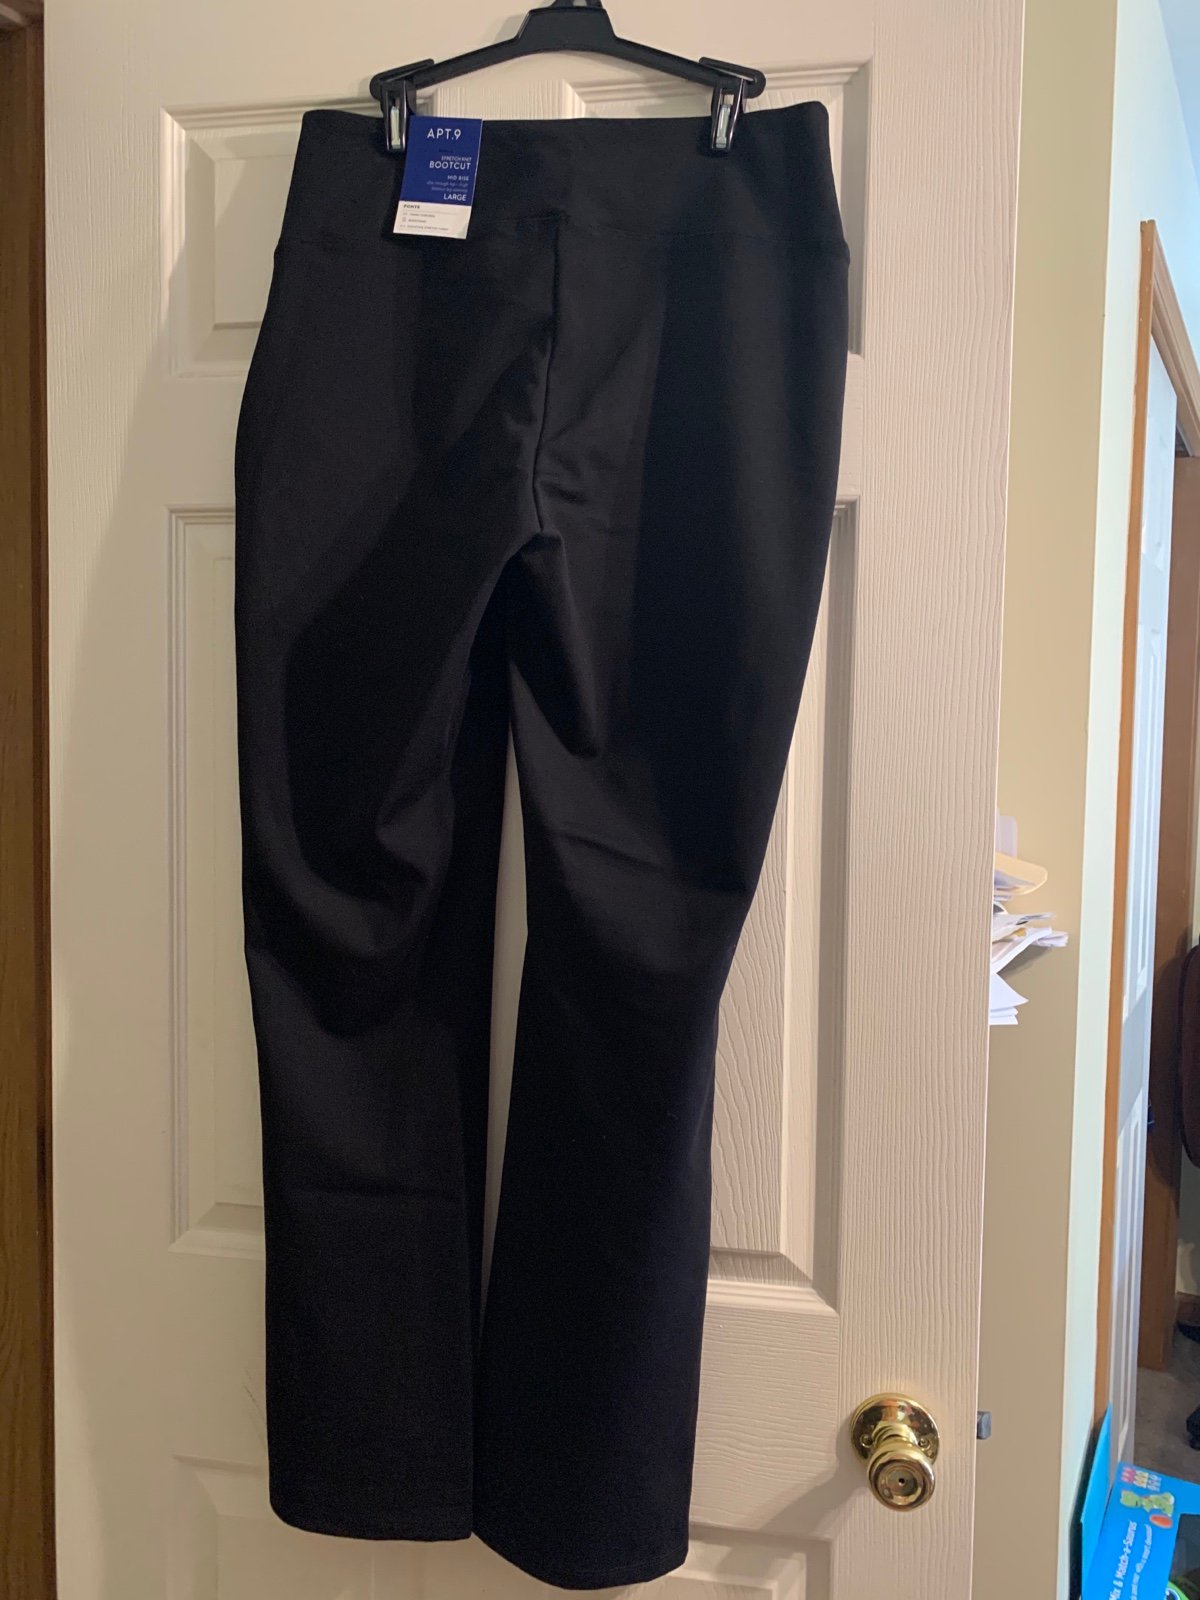 Latest  Black Dress Pants ky4sM3rKb just for you